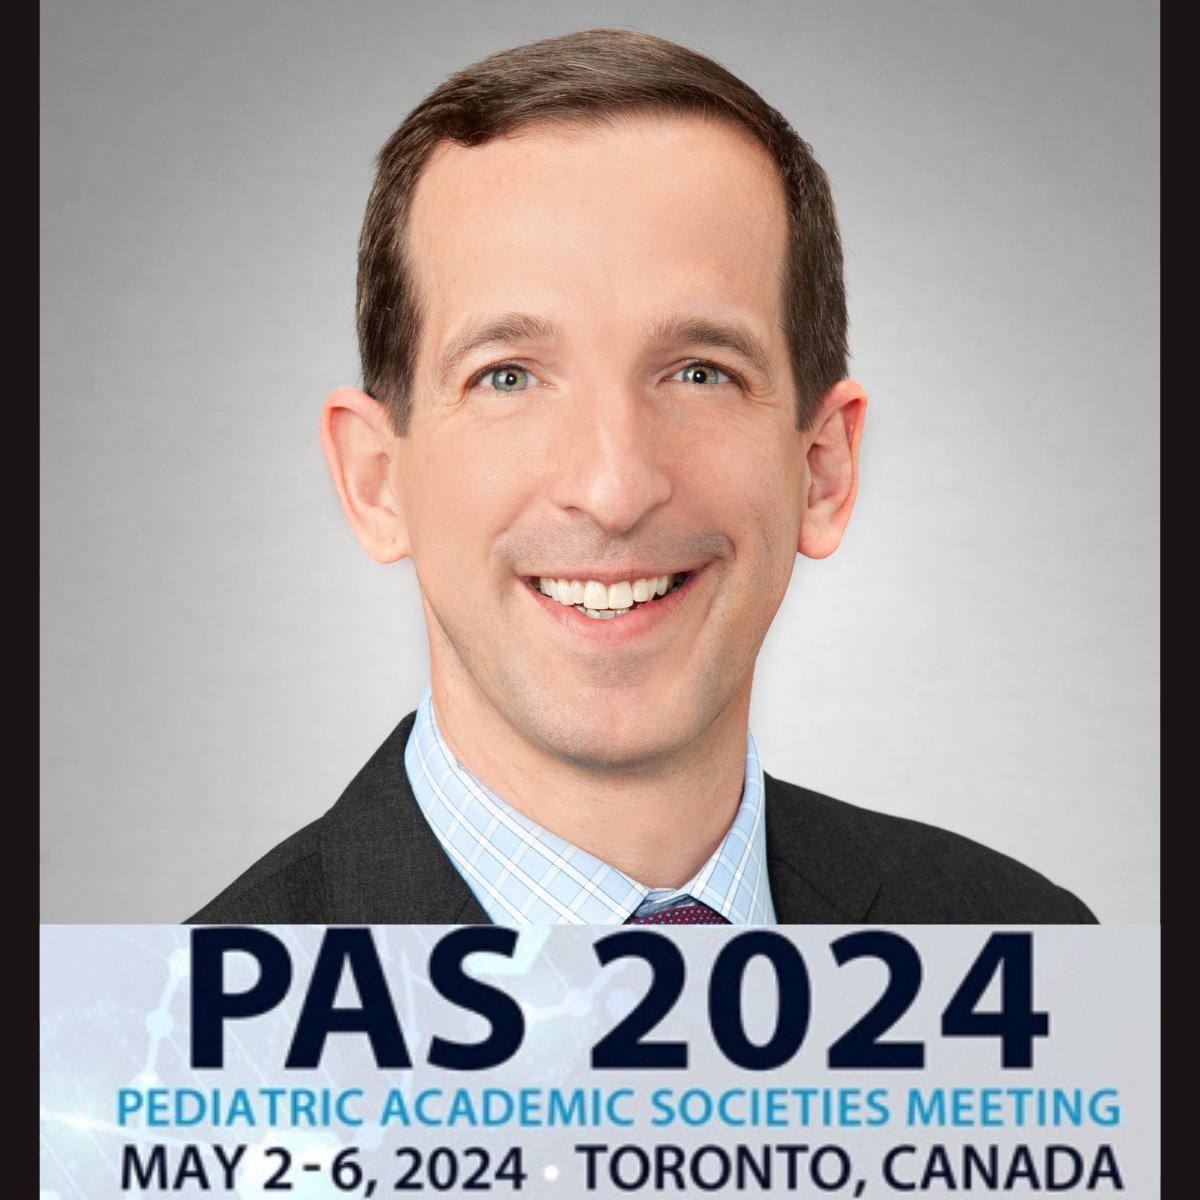 #PAS2024: Thomas Hooven, MD, is presenting 'AI Showcase: NEC Prediction and Diagnosis' from 12-12:15 p.m. at the Metro Toronto Convention Centre: 107 and 'NEC: Can Predictions Lead to Prevention?' from 4:25-4:35 p.m. in room 105. @PASMeeting @ChildrensPgh @PittPediatrics